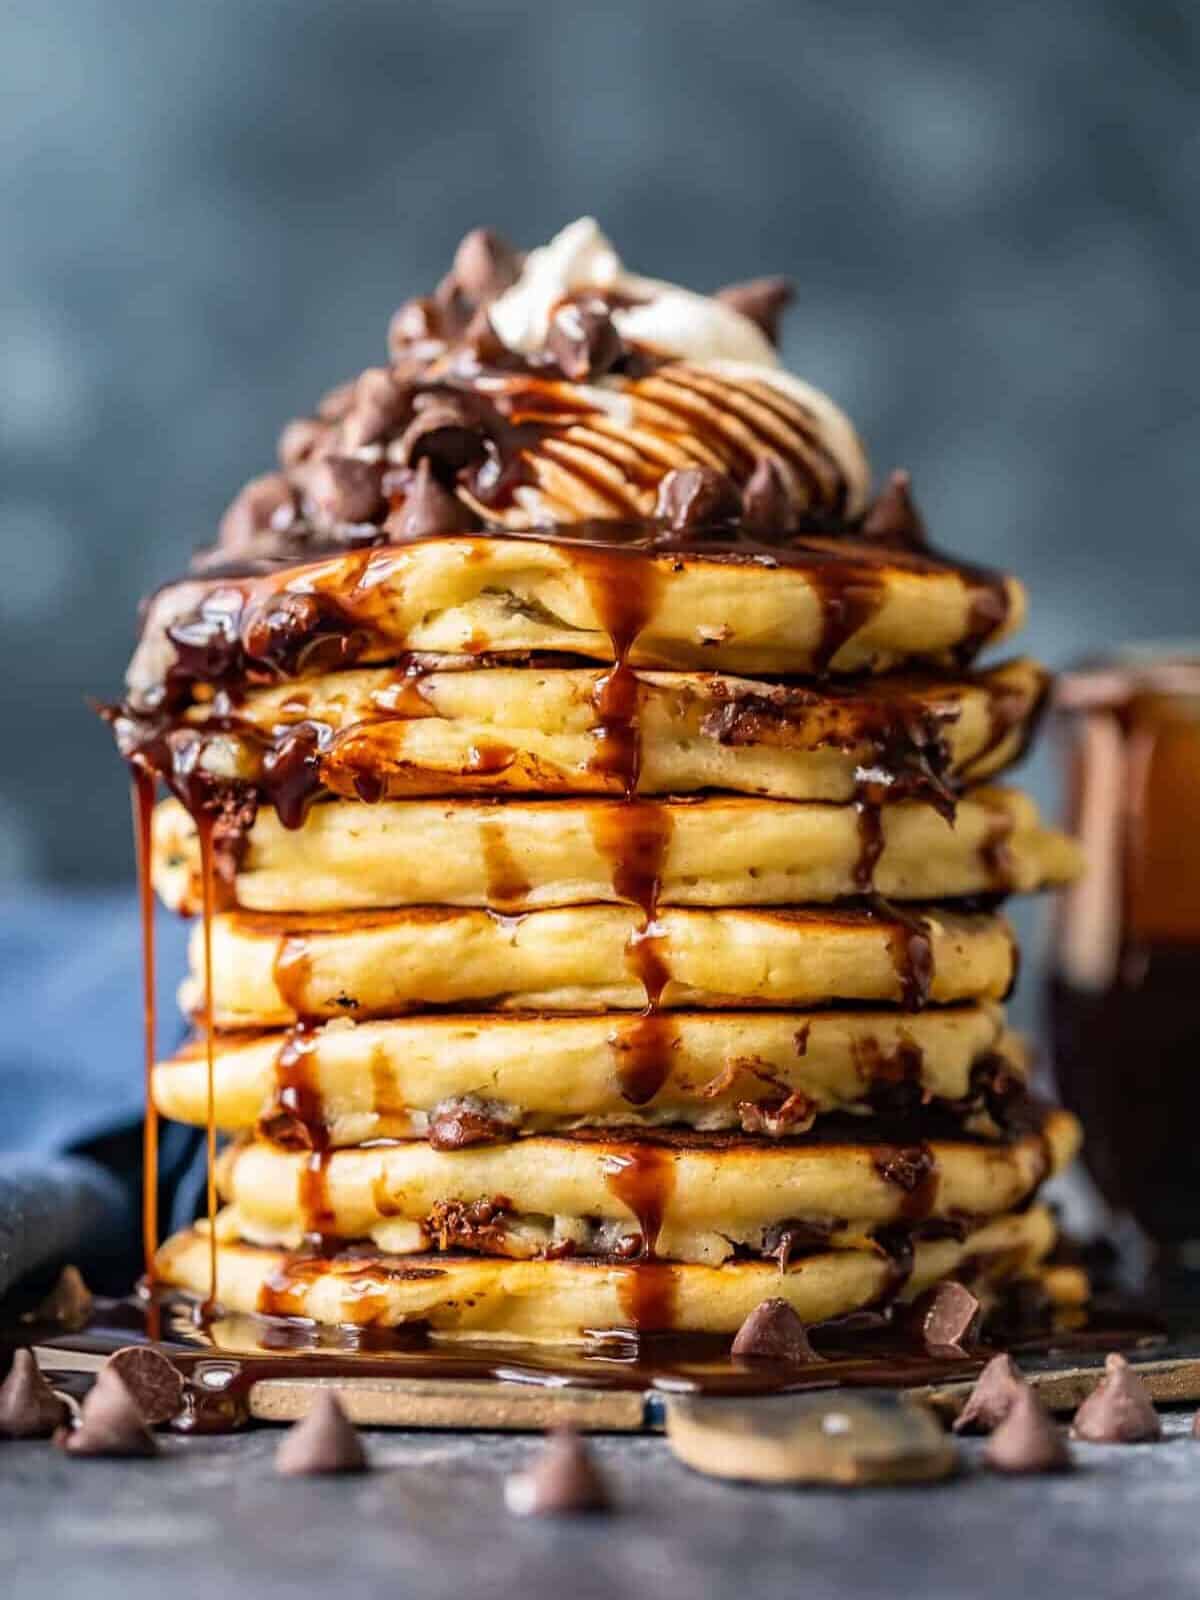 lots of chocolate chip pancakes stacked on each other drizzled with chocolate syrup and whipped cream